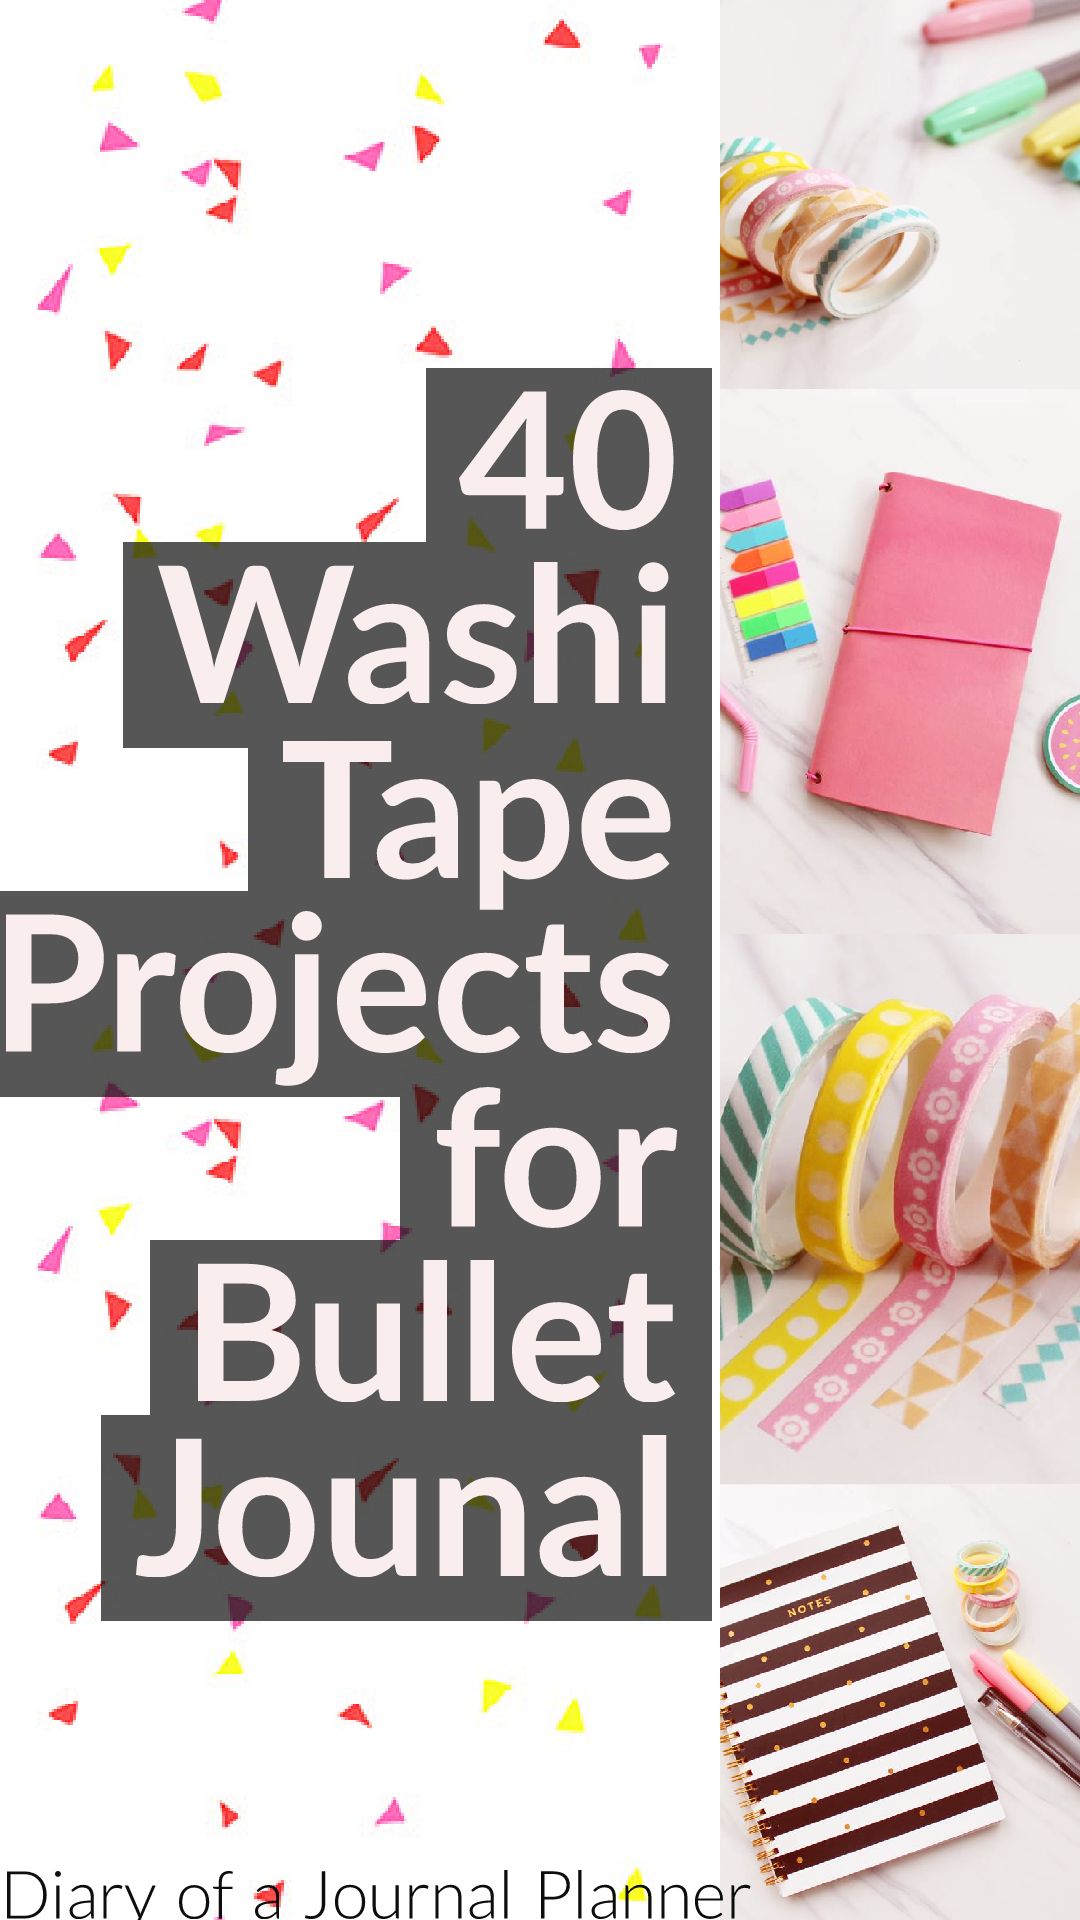 How to use washi tape in your bullet journal. many washi ideas and inspiration to decorate and imrpove your bullet journal pages